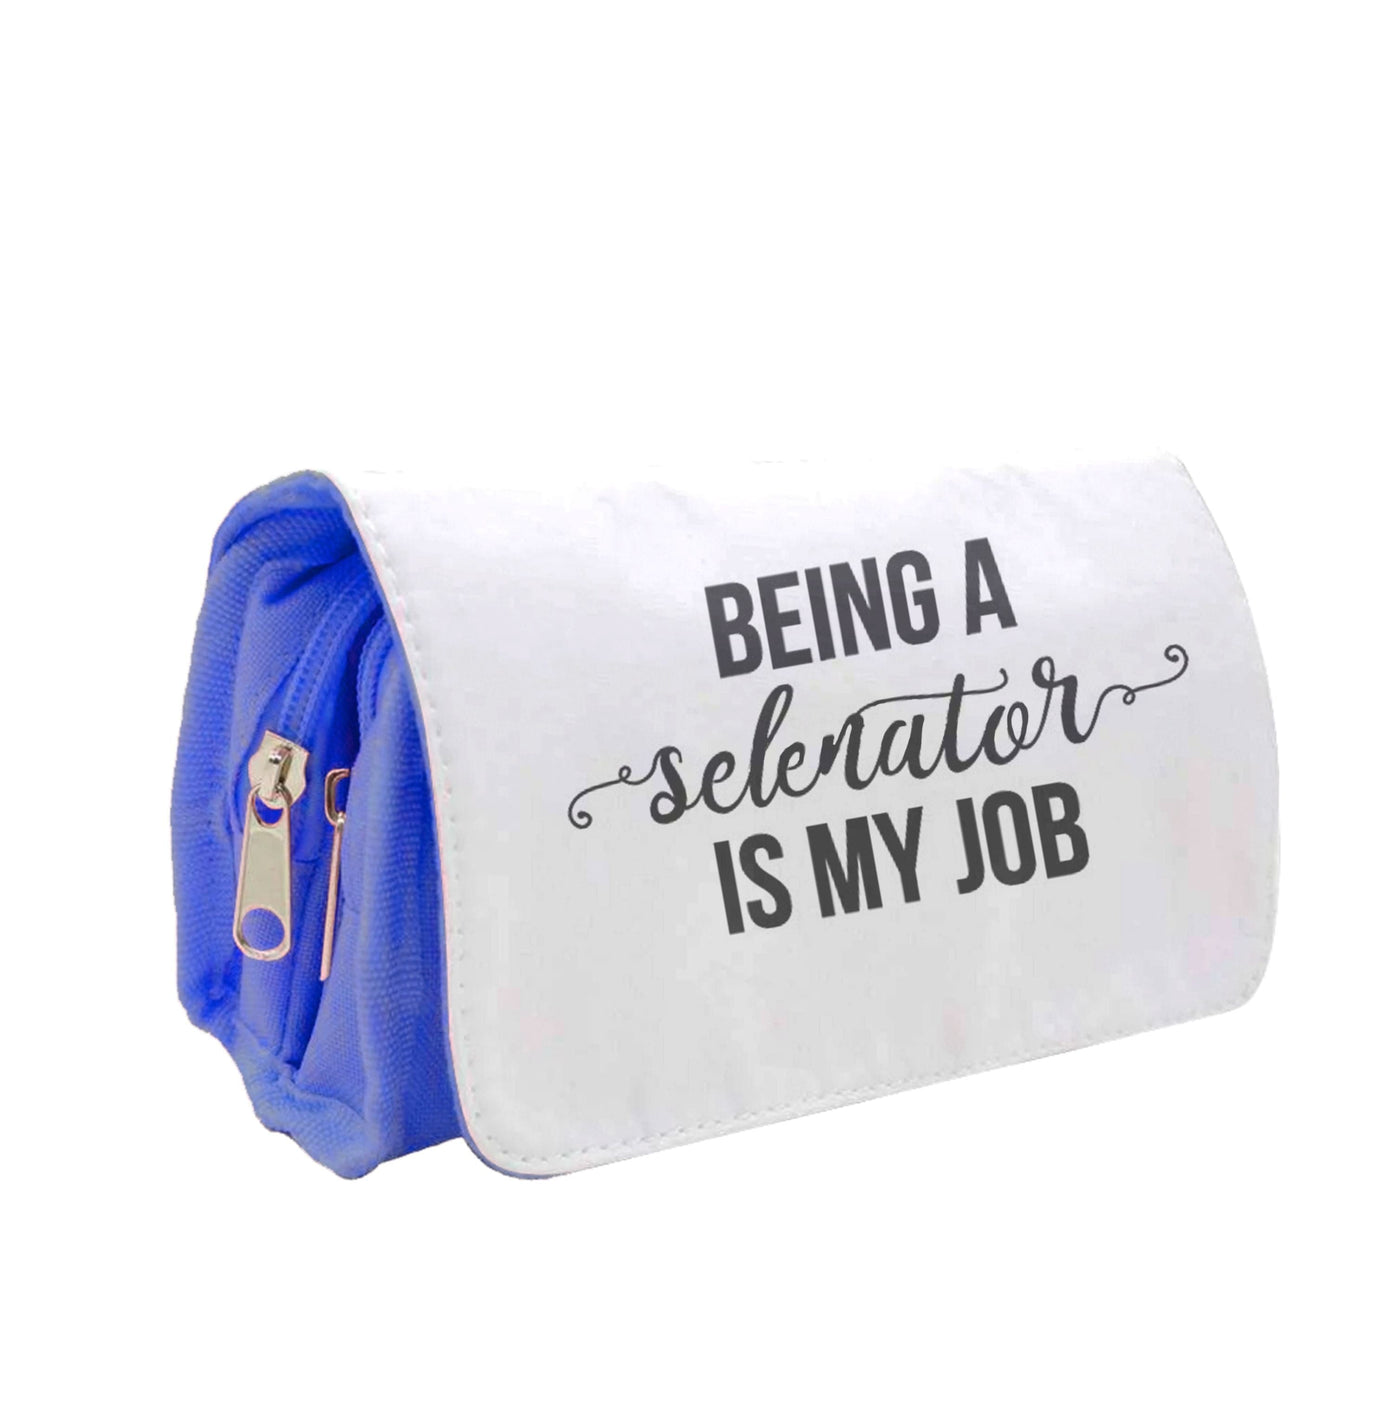 Being A Selenator Is My Job... Pencil Case